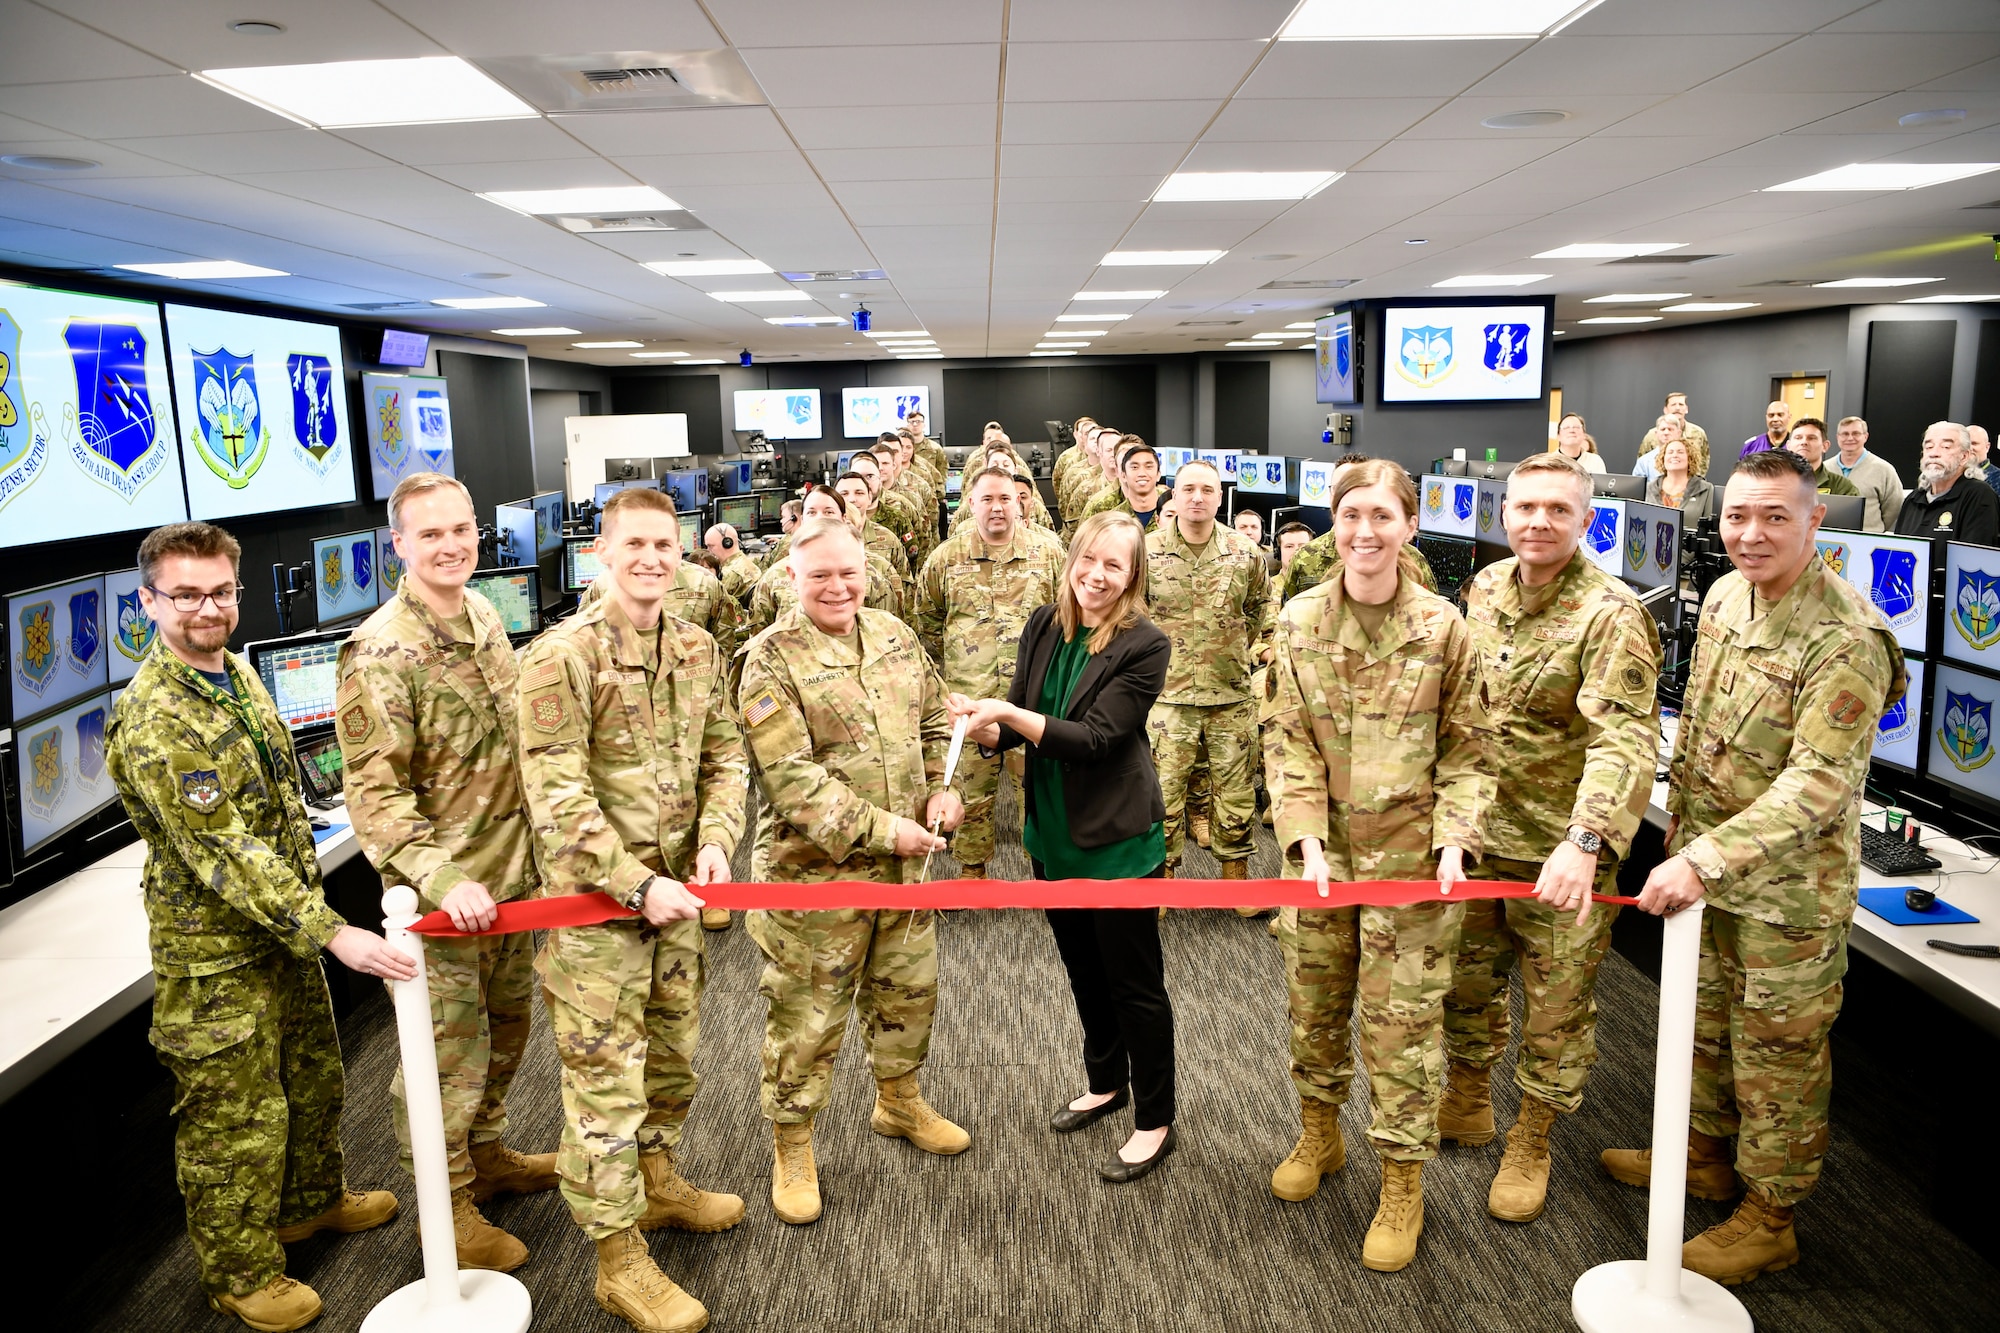 A red ribbon is cut with large scissors to open the new Western Air Defense Sector's Agile Operations Center